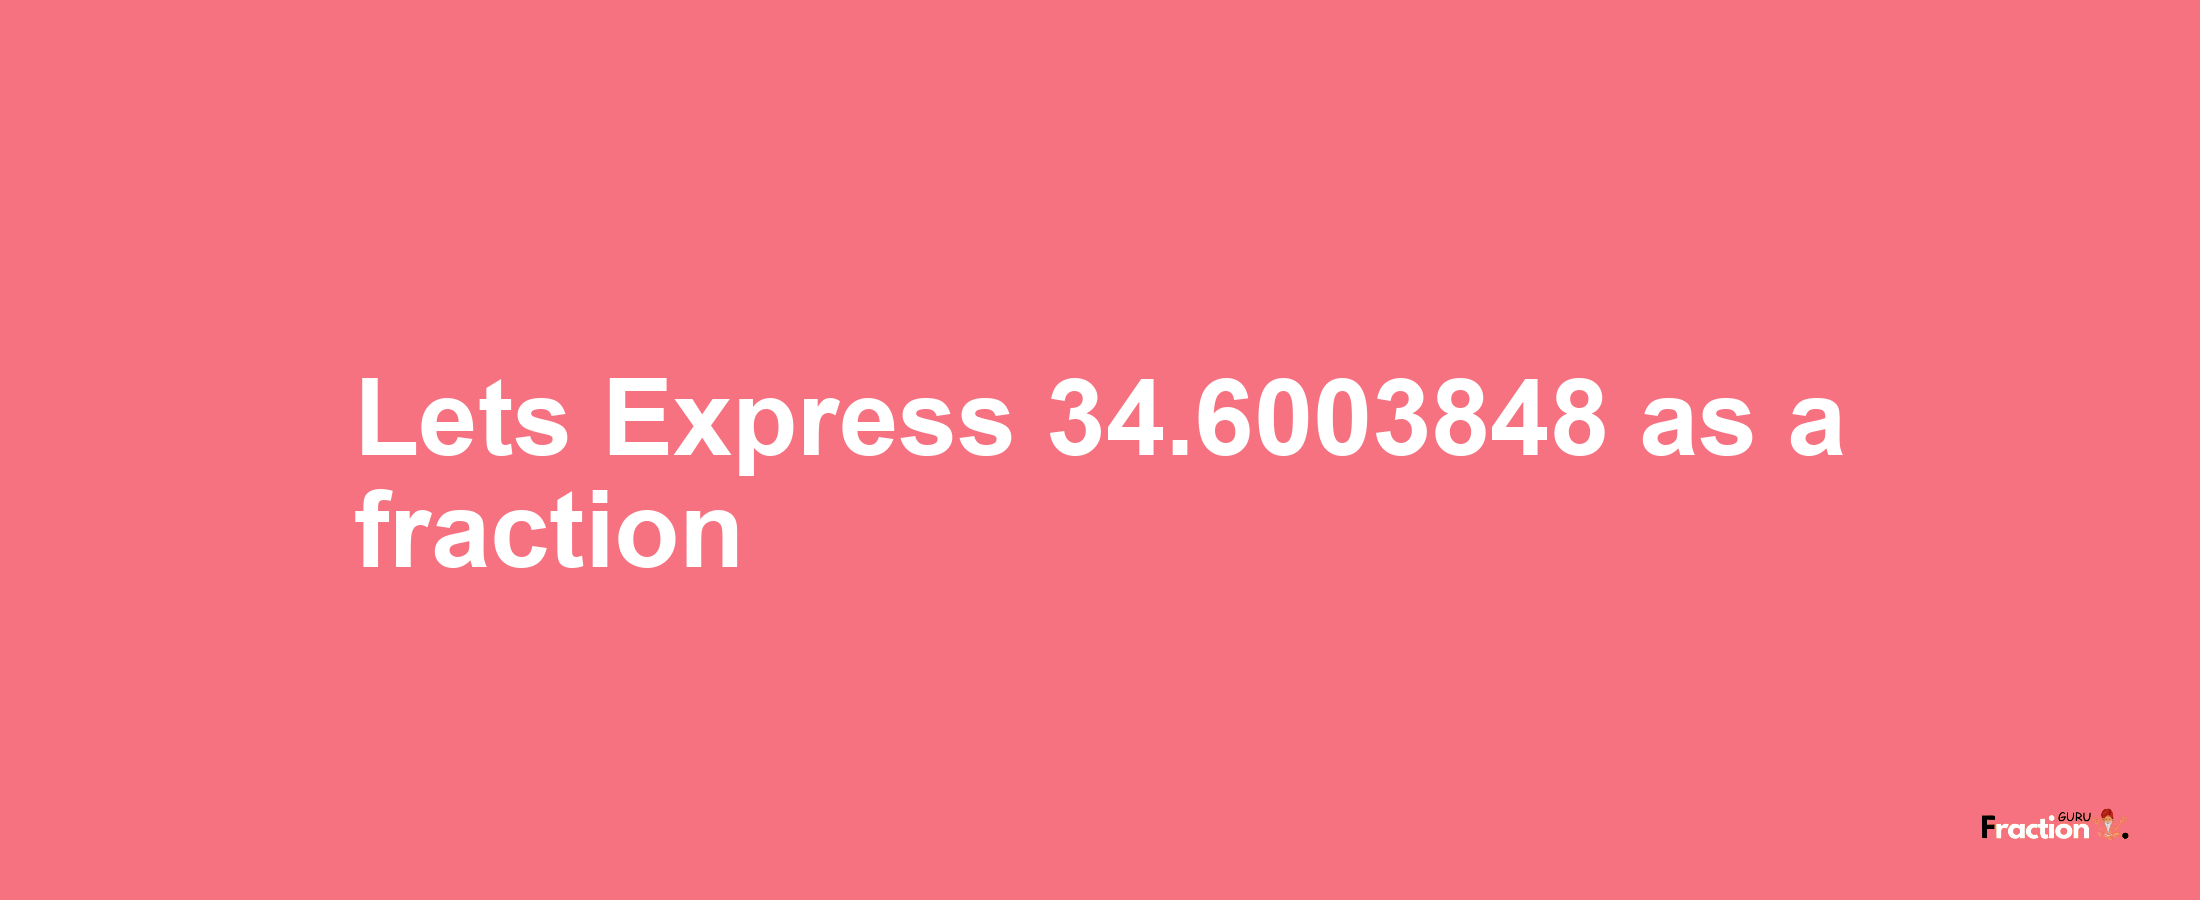 Lets Express 34.6003848 as afraction